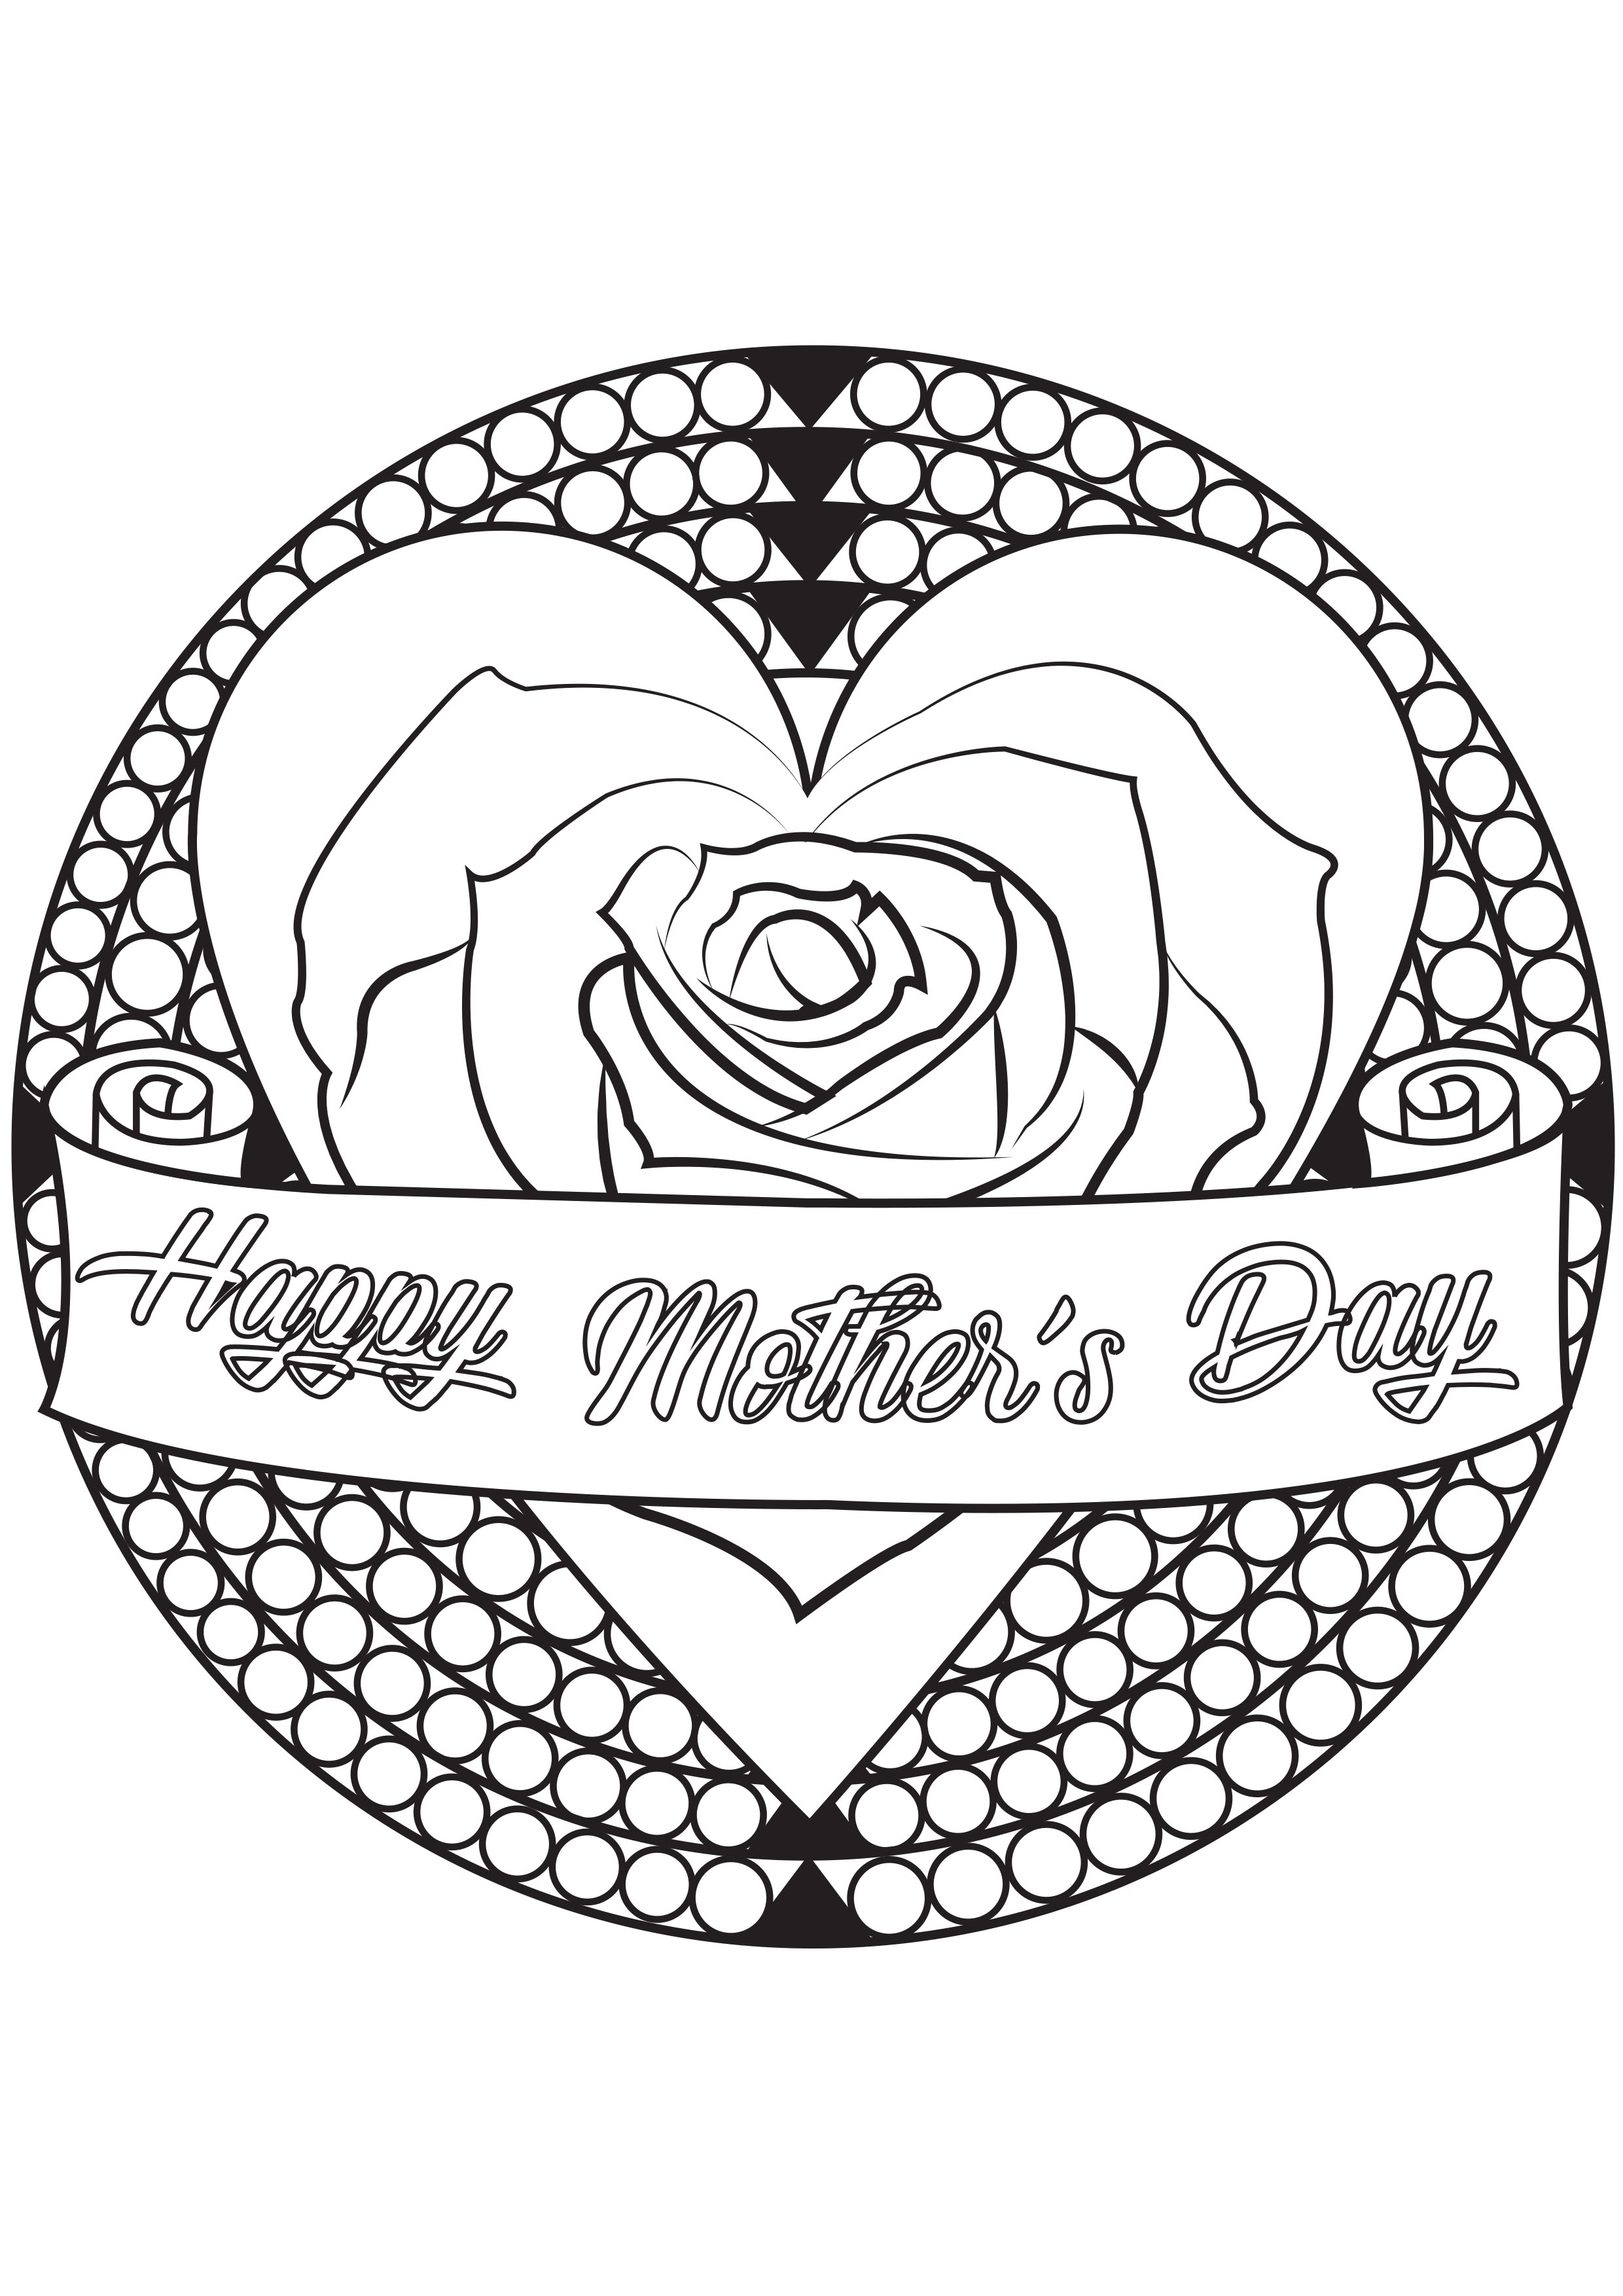 Happy mothers day to color for kids - Happy Mothers day Kids Coloring Pages